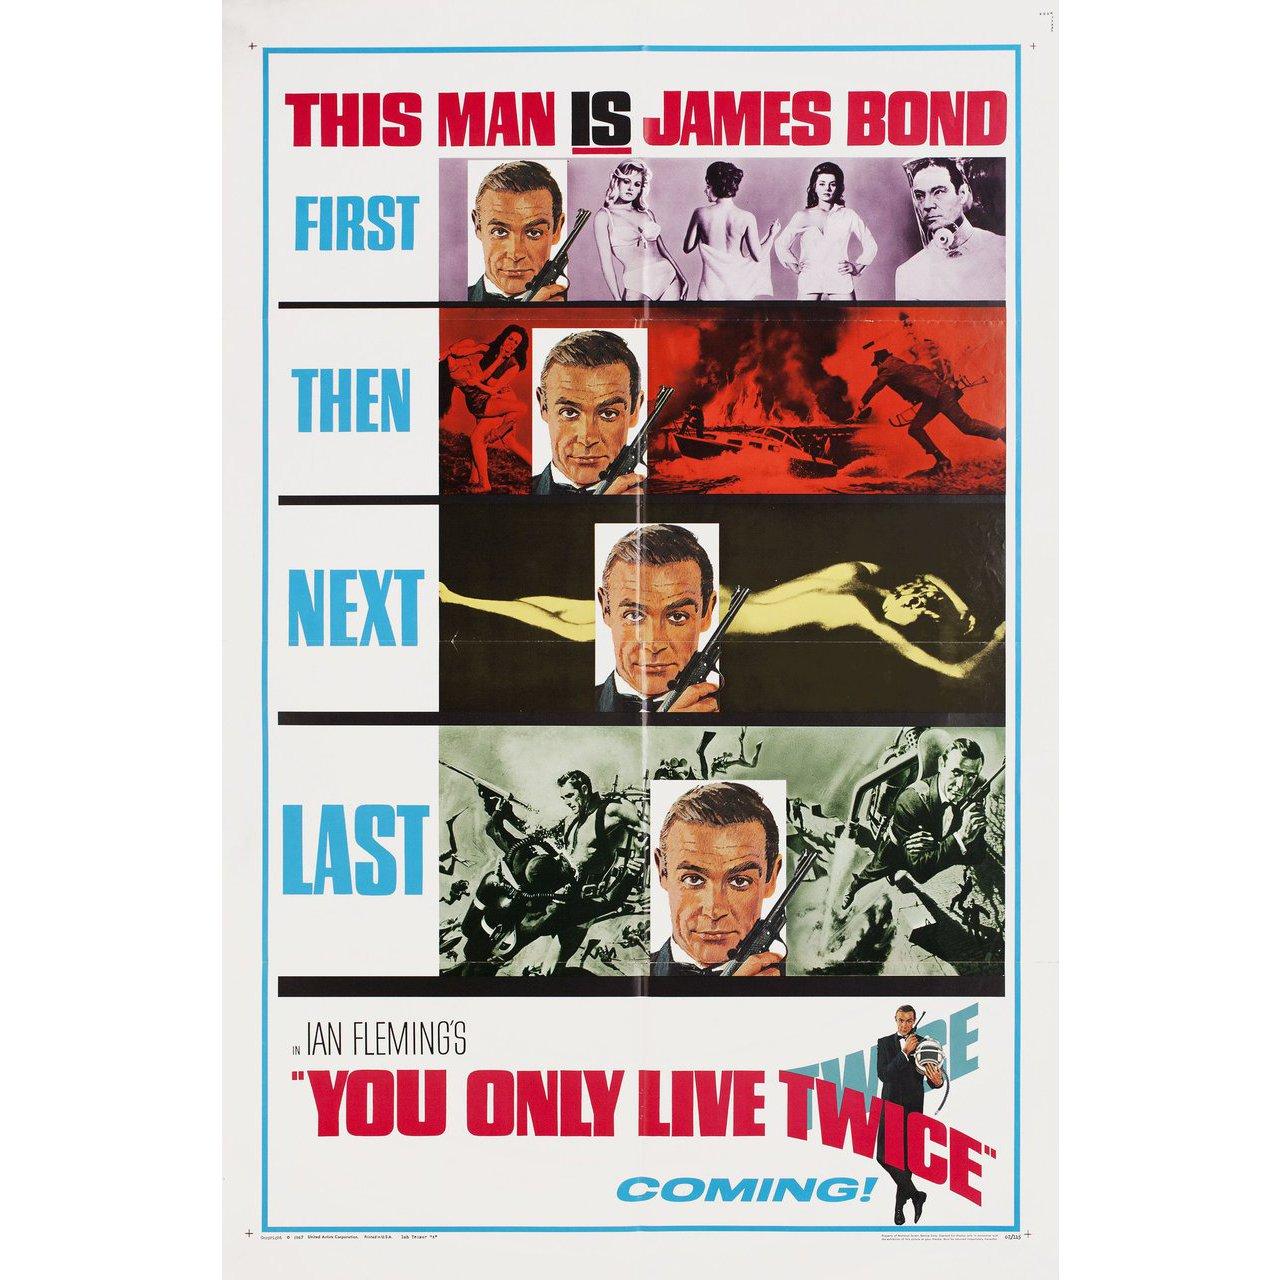 Original 1967 U.S. one sheet poster by Robert McGinnis / Frank McCarthy for the film You Only Live Twice directed by Lewis Gilbert with Sean Connery / Akiko Wakabayashi / Mie Hama / Tetsuro Tanba. Very Good-Fine condition, folded. Many original